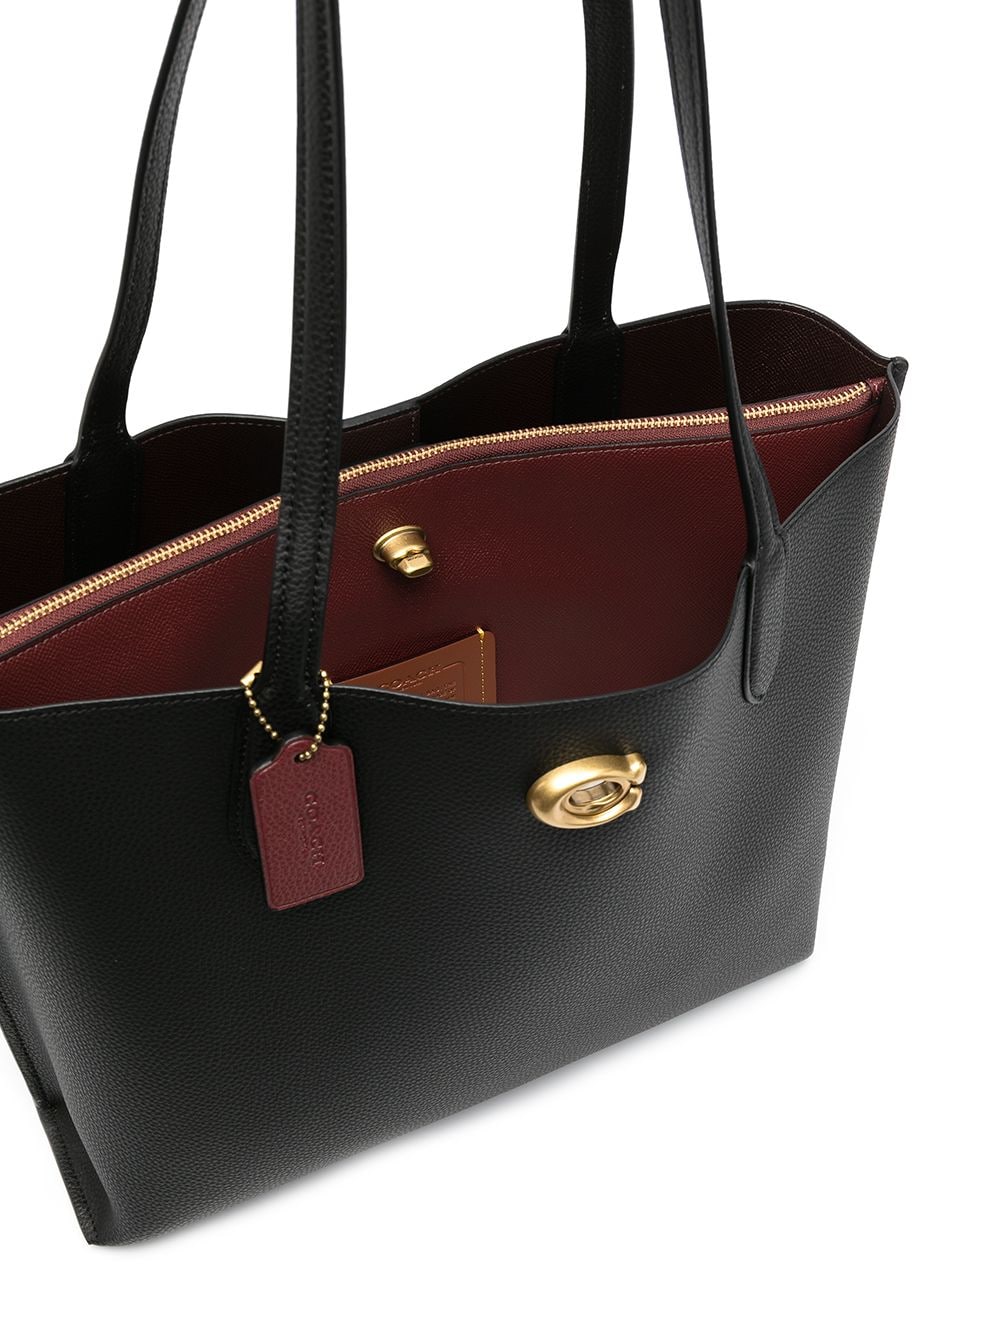 Coach Tote Bags for Women on Sale - FARFETCH